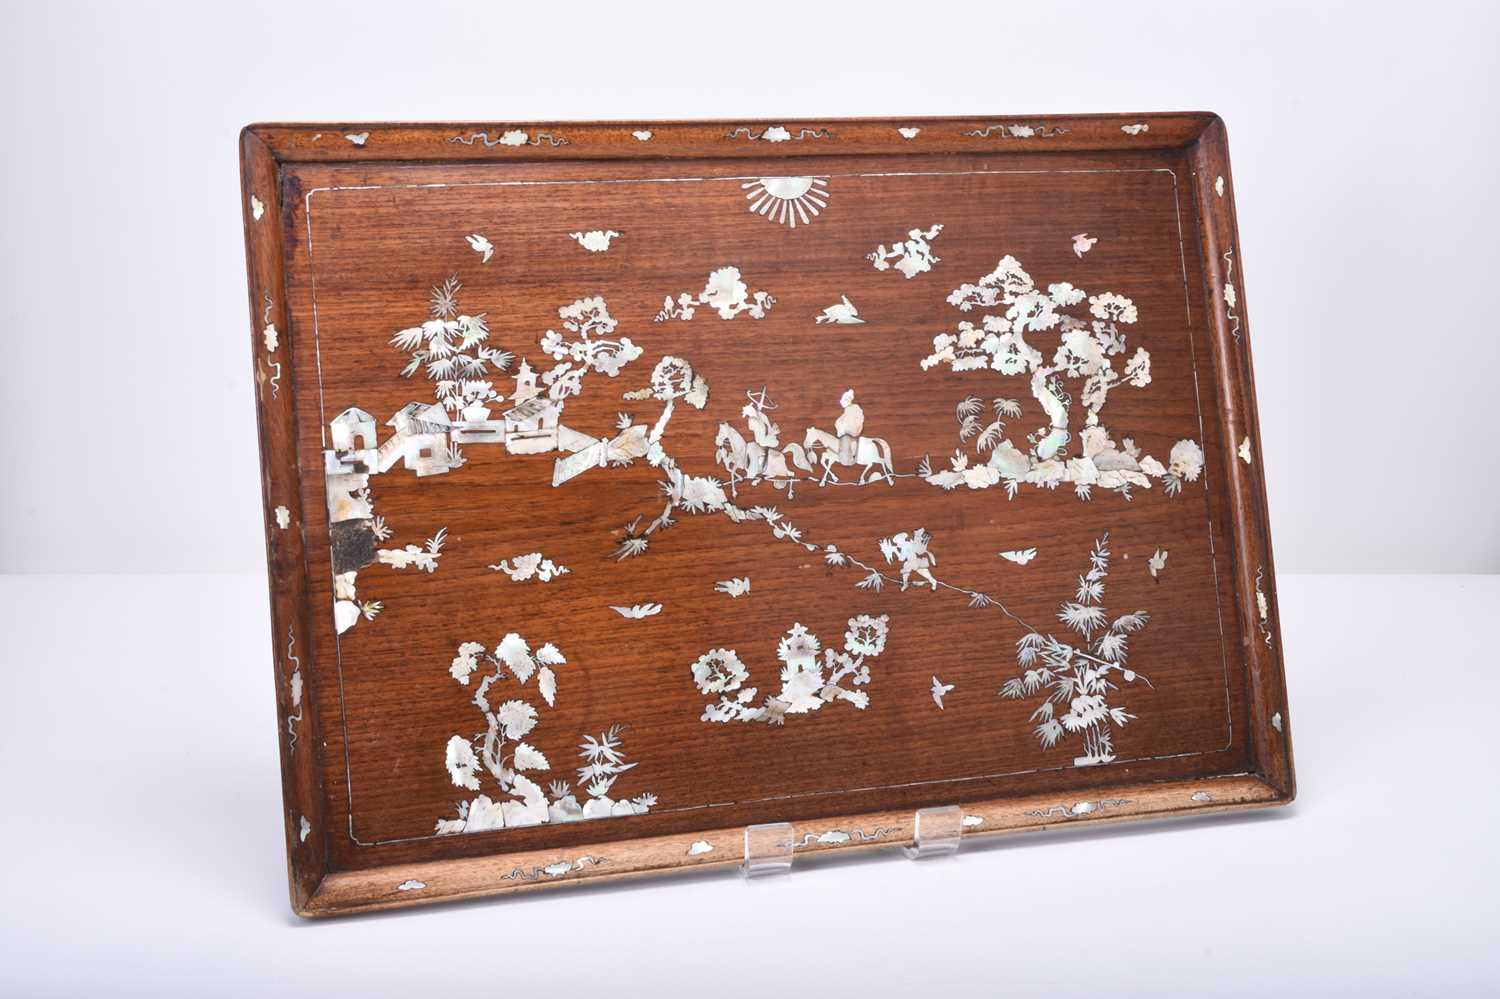 A Chinese mother-of-pearl inlaid rosewood rectangular tray, Qing Dynasty